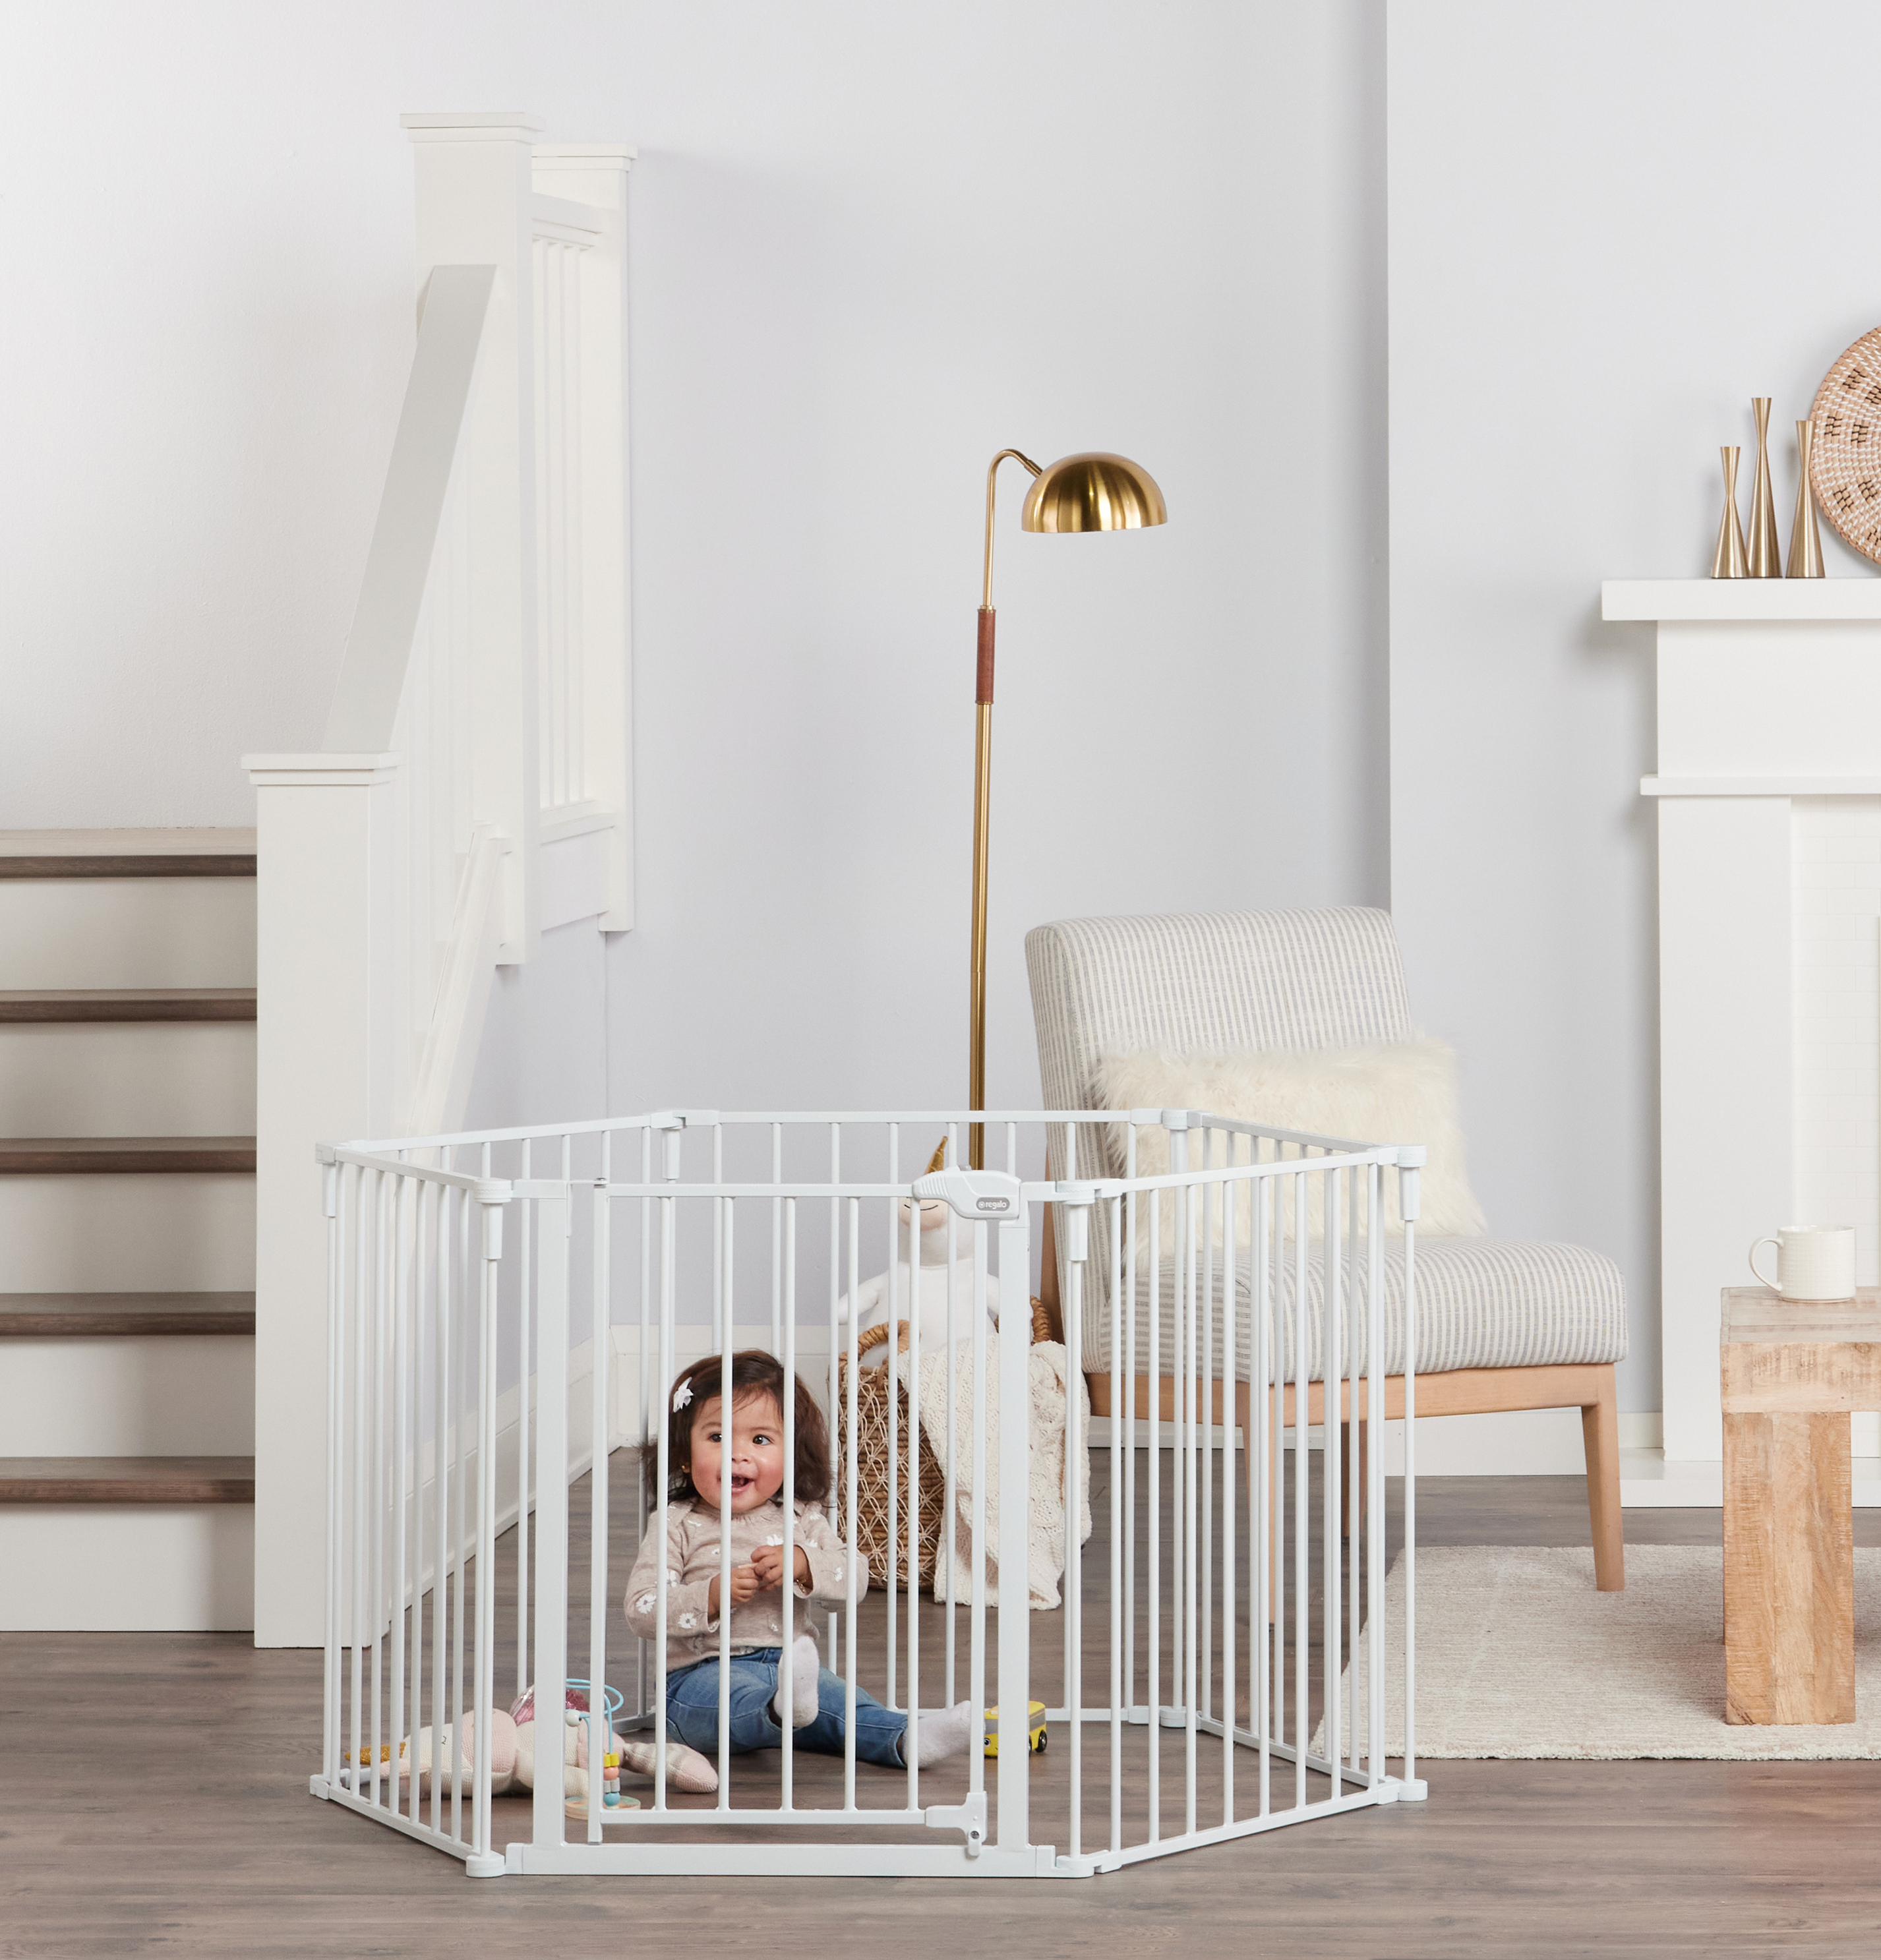 Regalo Super Wide Baby Gate, Features Play Yard Option, White, 144", Age Group 6-24 Months - image 5 of 7